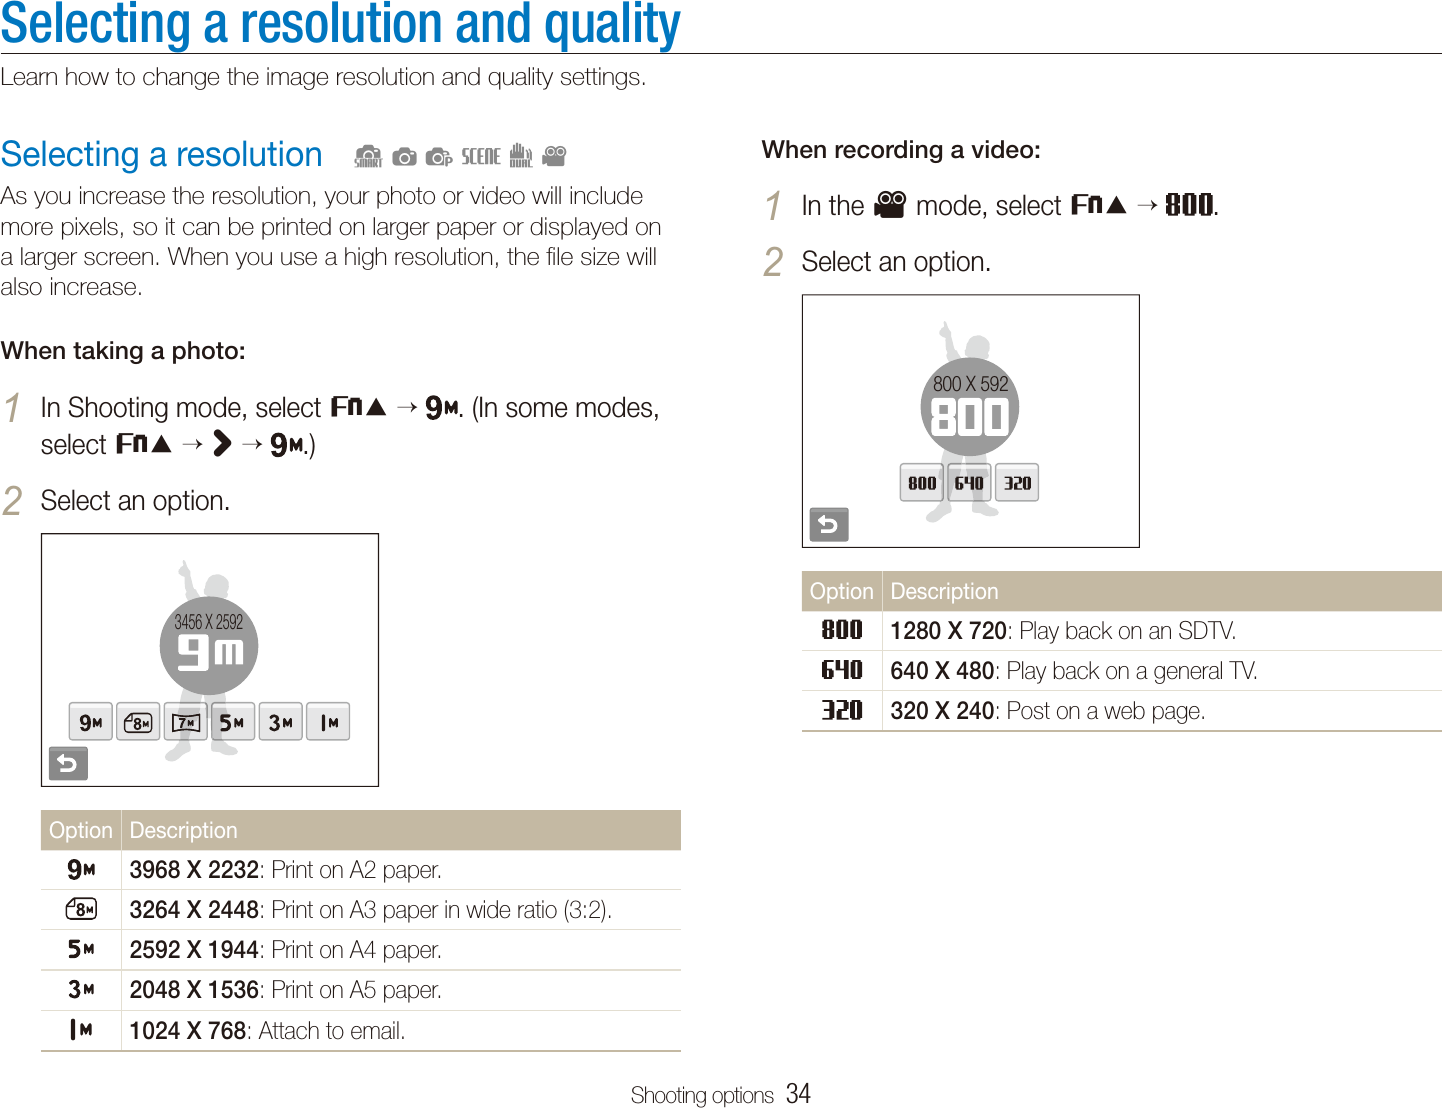 Shooting options  34Selecting a resolution and qualityLearn how to change the image resolution and quality settings.When recording a video:In the 1 v mode, select f  .Select an option.2 800 X 592Option Description1280 X 720: Play back on an SDTV.640 X 480: Play back on a general TV.320 X 240: Post on a web page.Selecting a resolutionAs you increase the resolution, your photo or video will include more pixels, so it can be printed on larger paper or displayed on a larger screen. When you use a high resolution, the ﬁle size will also increase.When taking a photo:In Shooting mode, select 1 f  . (In some modes, select f  &gt;  .)Select an option.2 3456 X 2592Option Description3968 X 2232: Print on A2 paper.3264 X 2448: Print on A3 paper in wide ratio (3:2).2592 X 1944: Print on A4 paper.2048 X 1536: Print on A5 paper.1024 X 768: Attach to email.  Sapsdv